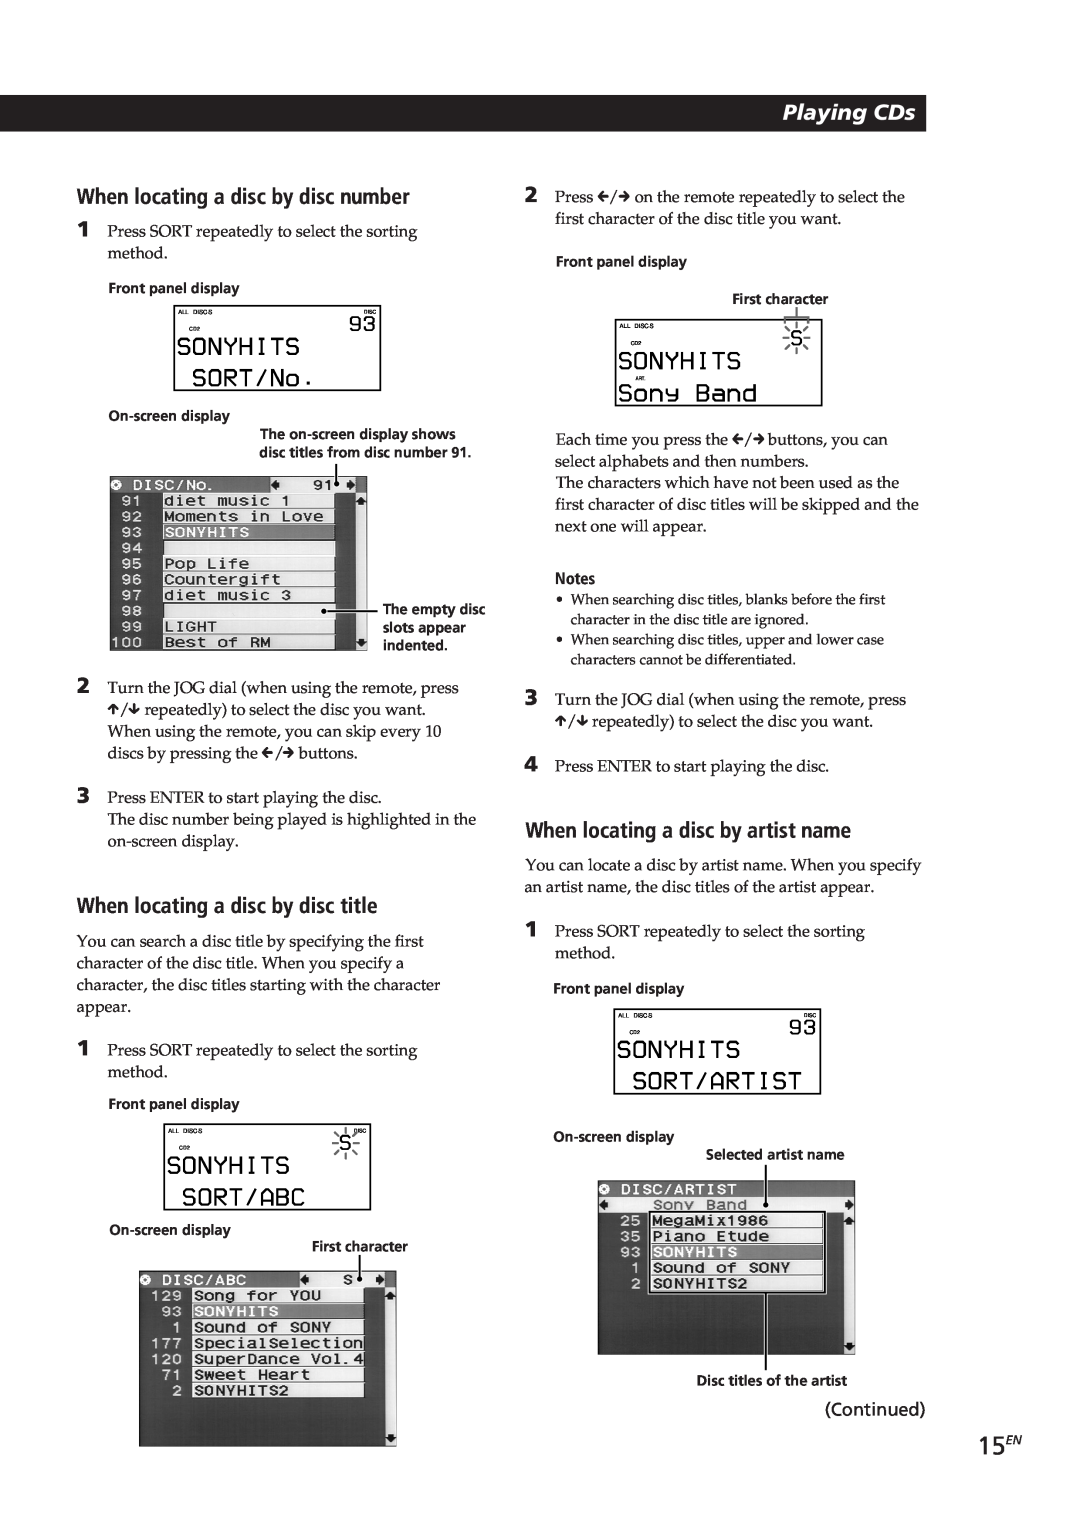 Sony CDP-CX270 manual 15EN, Sonyhits Sort/Abc, Sony Band, SORT/No, Sonyhits Sort/Artist, Playing CDs, Continued, Notes 